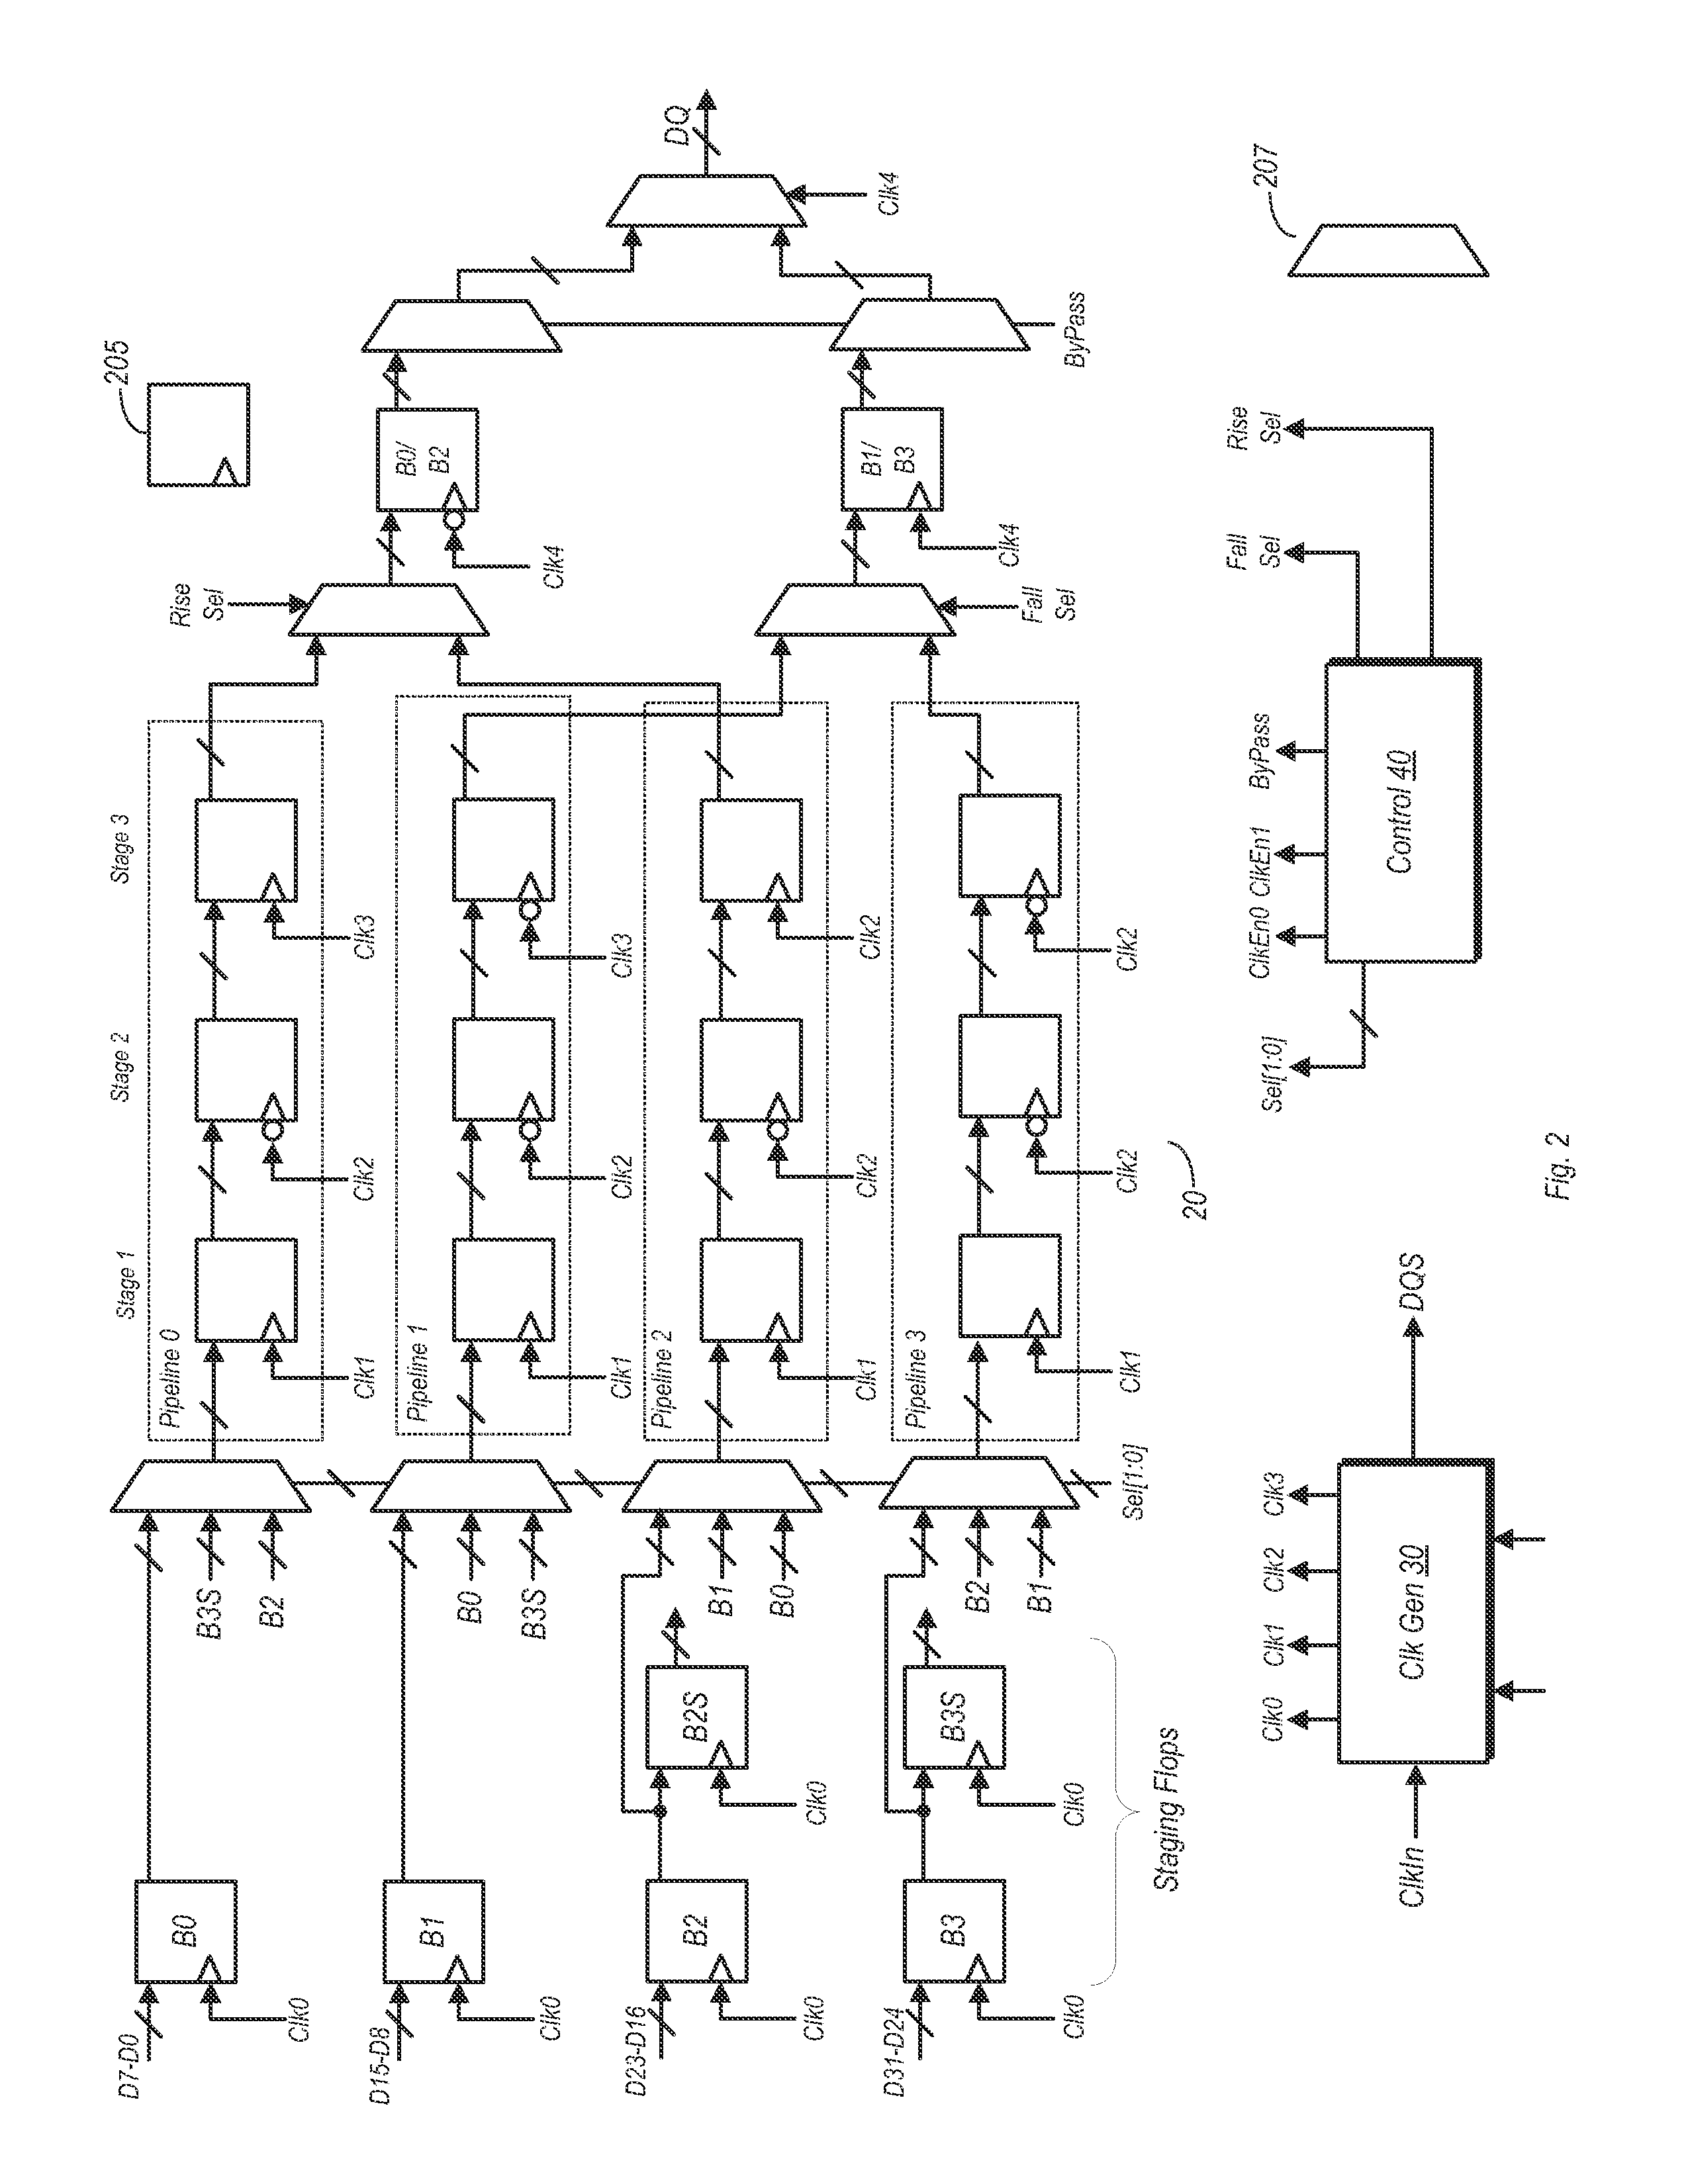 Method and apparatus for delay compensation in data transmission